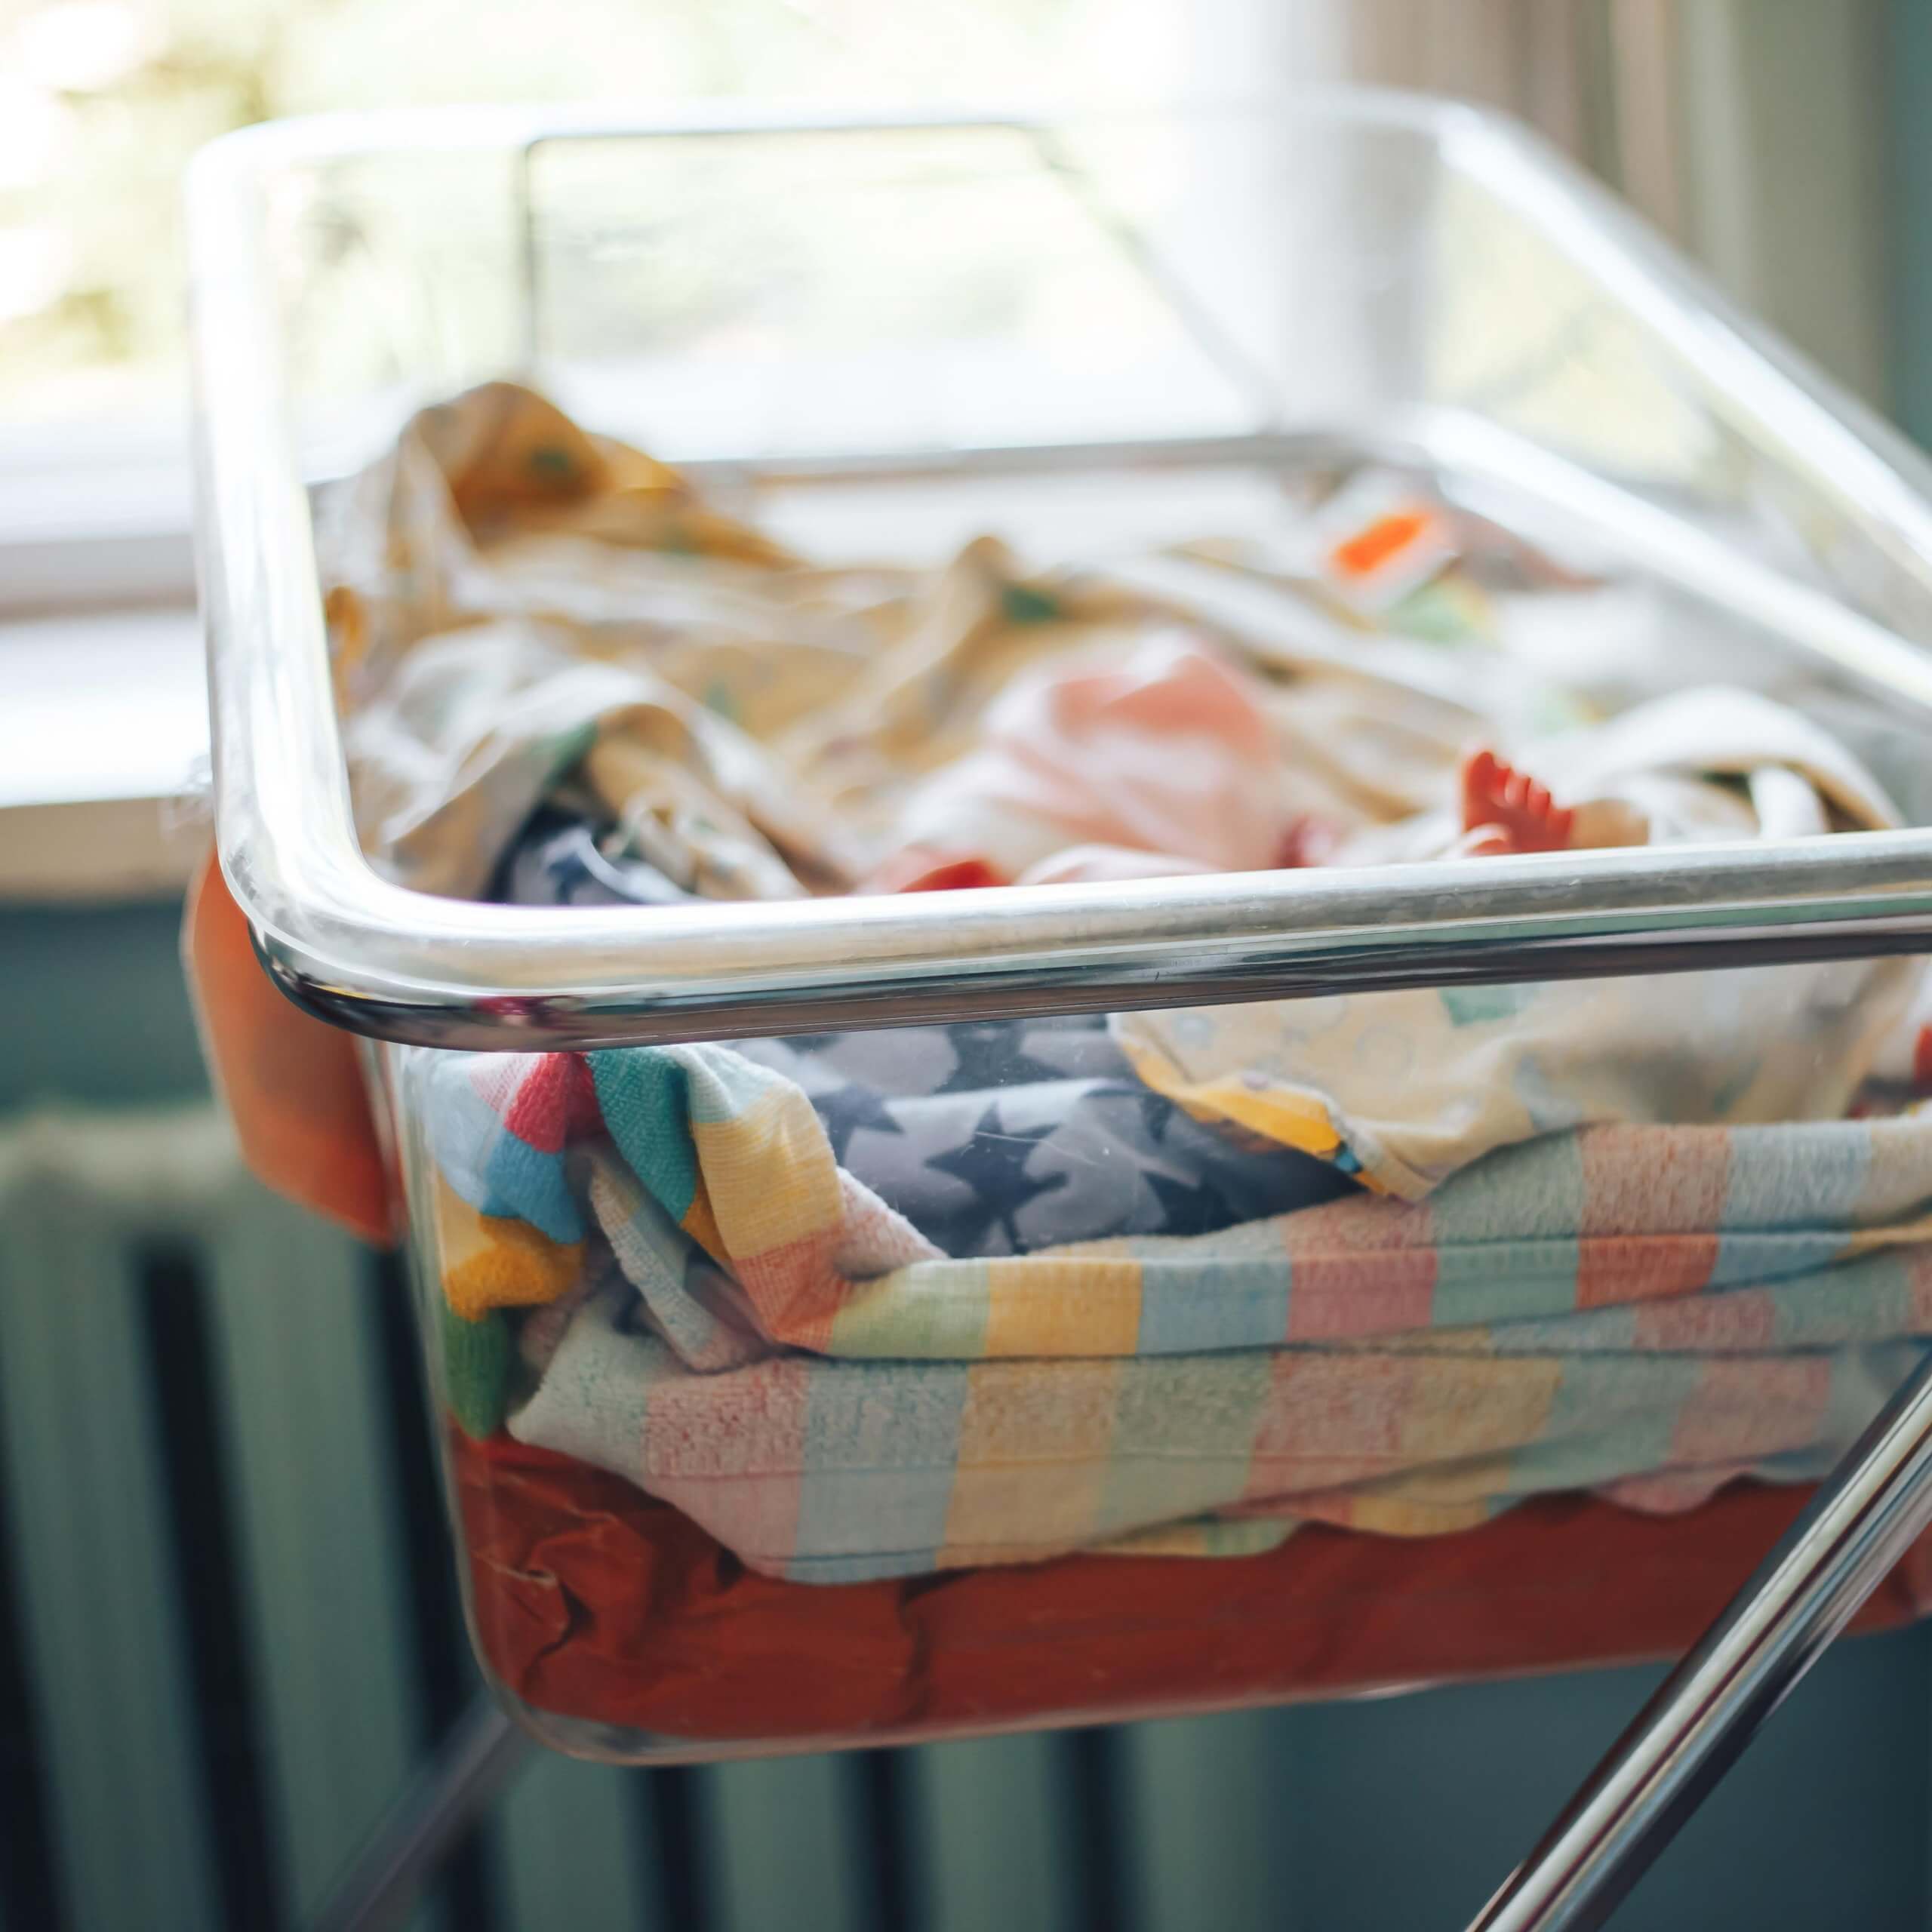 An image of an empty cot, with light coming in from a nearby window. A visual metaphor for the topic of this article, The Neonatal Care (Leave and Pay) Act 2023.